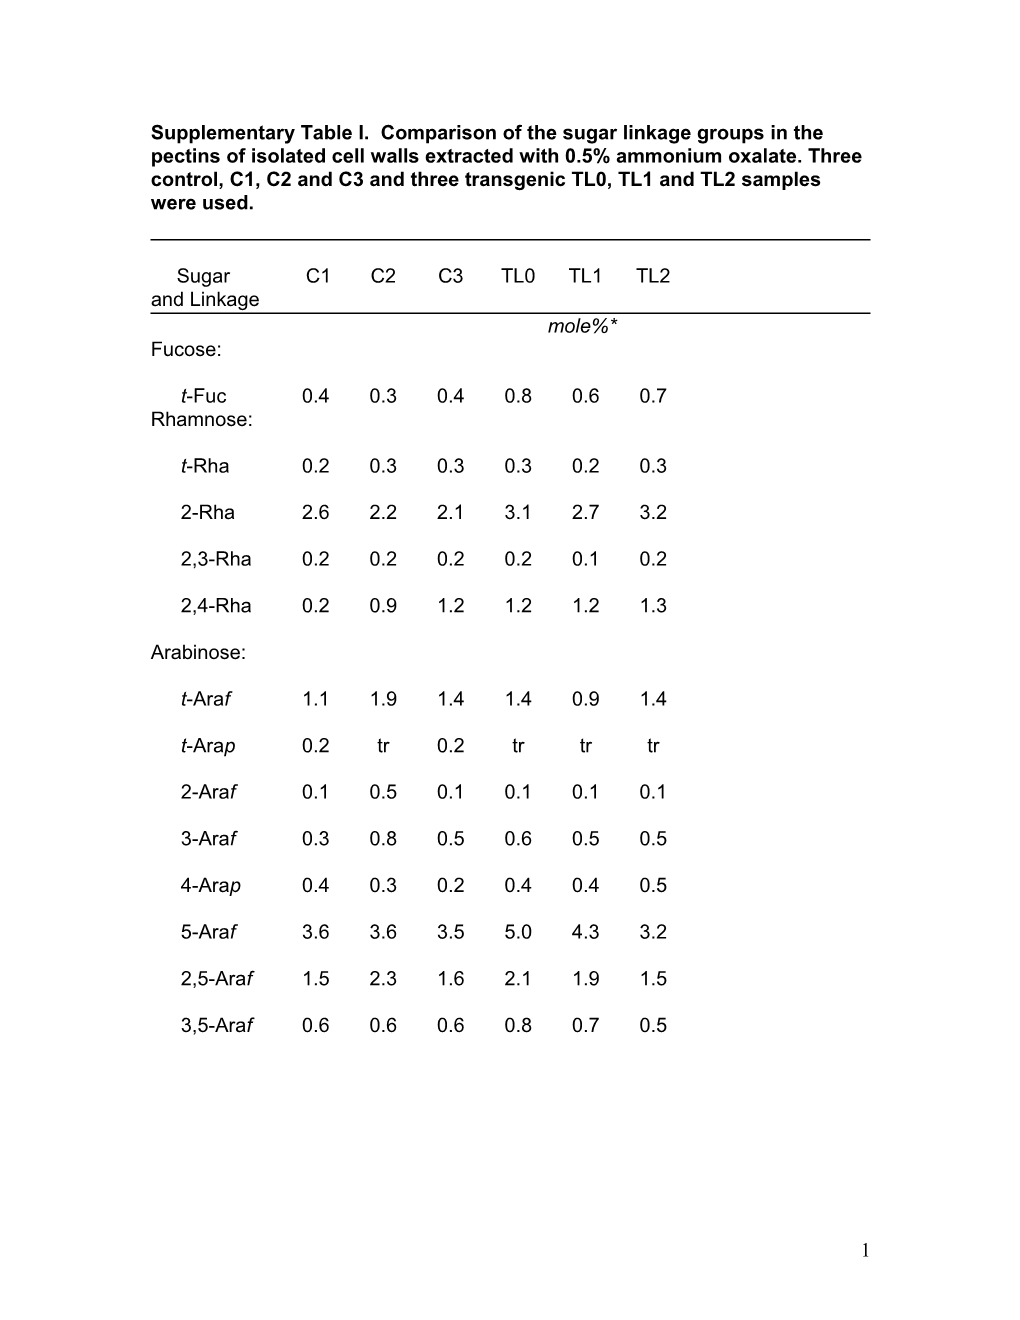 Supplementary Table I. Comparison of the Sugar Linkage Groups in the Pectins of Isolated